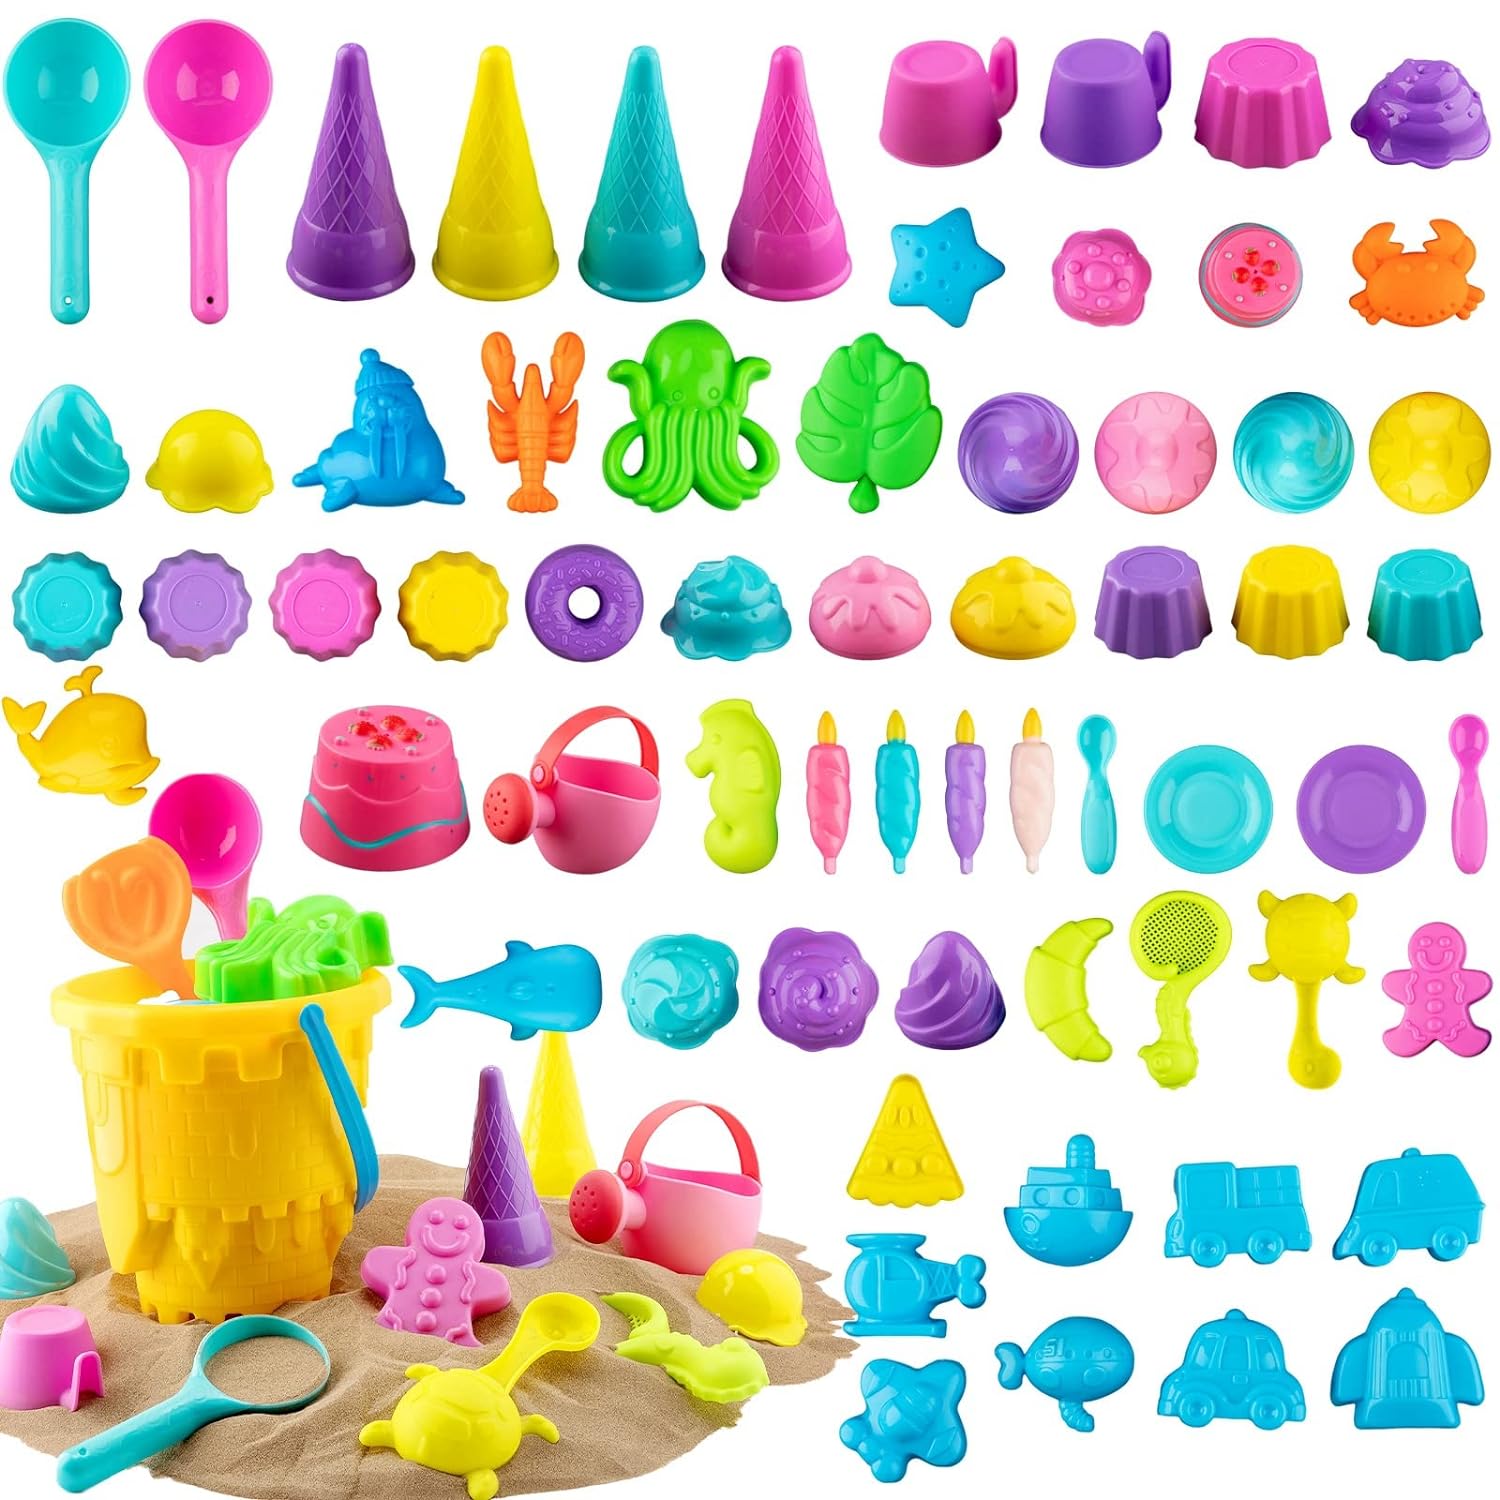 Great Choice Products 62 Pcs Kids Beach Toys Ice Cream Sand Beach Toys Set For Kids Sand Essentials Bucket And Shovels Set With Mesh Bag Castl…